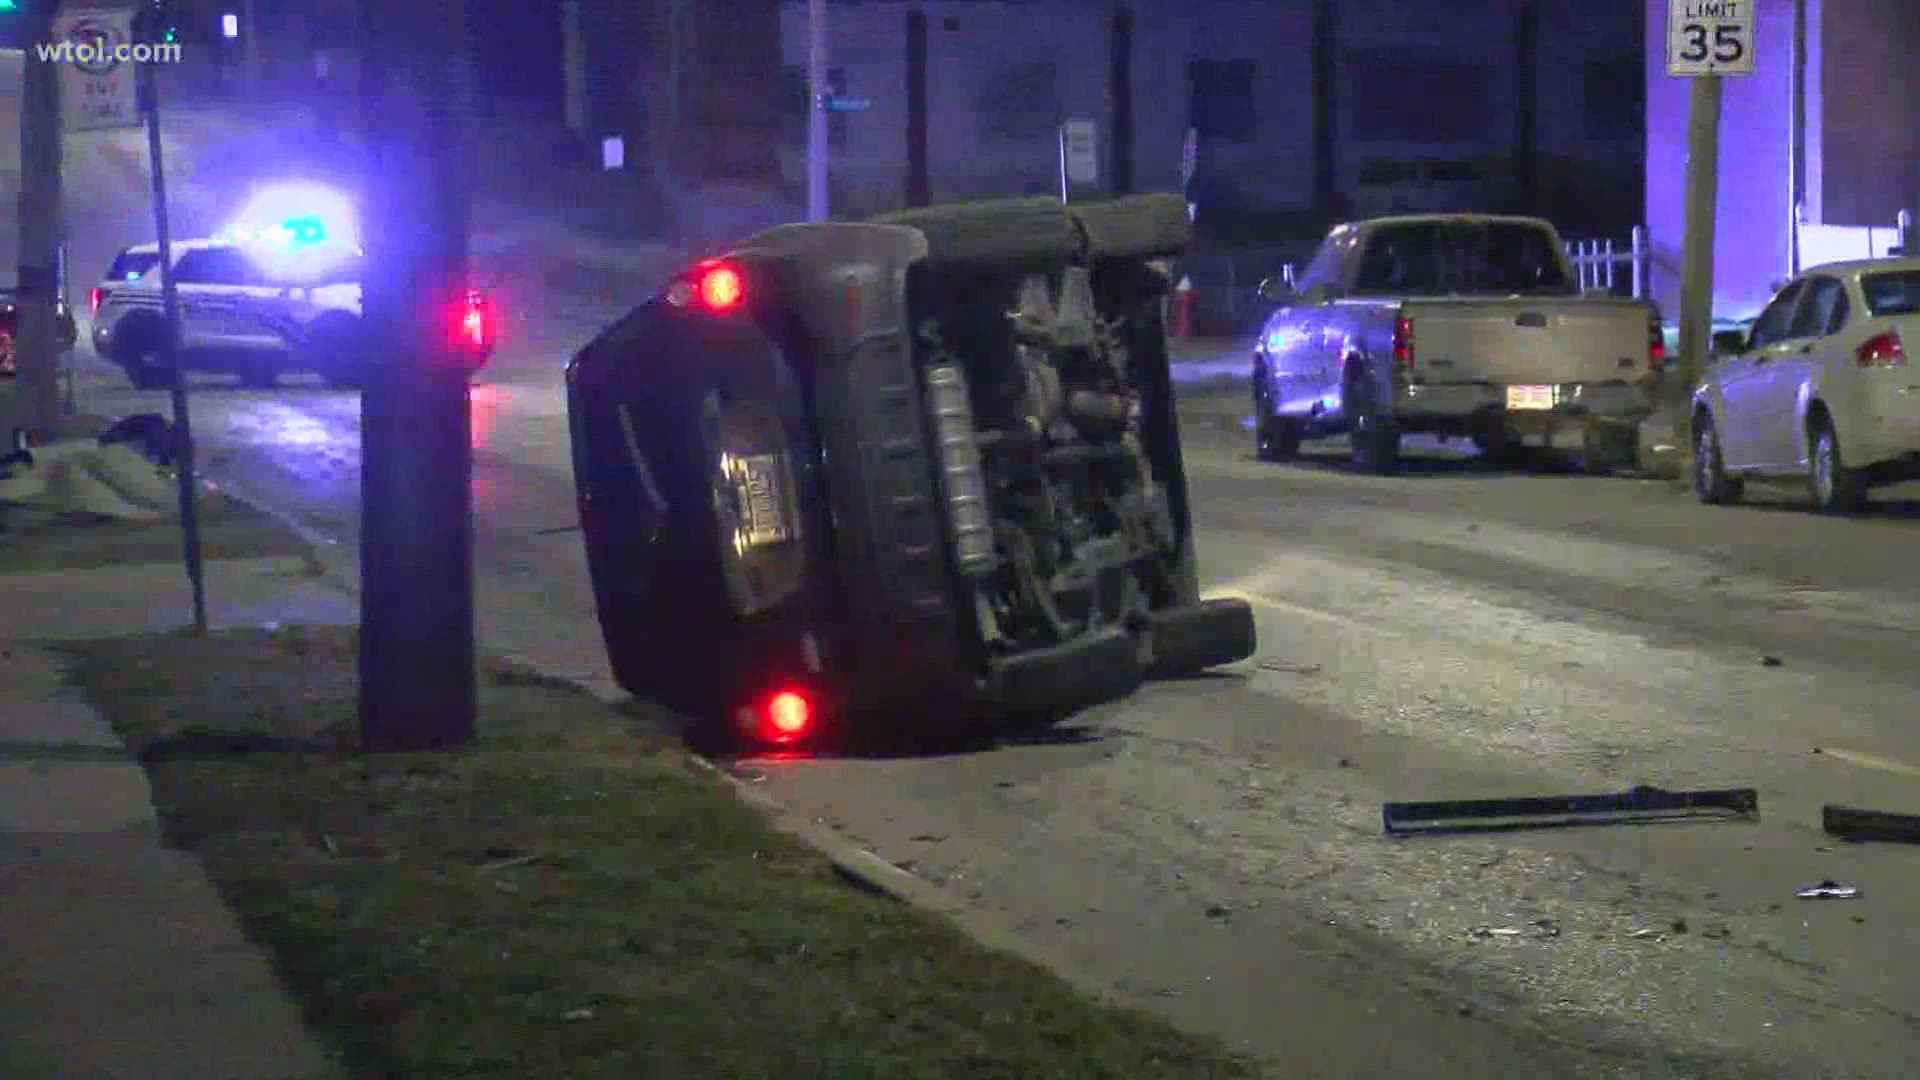 Police are searching for a driver who fled the scene of a crash which caused their car to flip on Upton near Freeman.